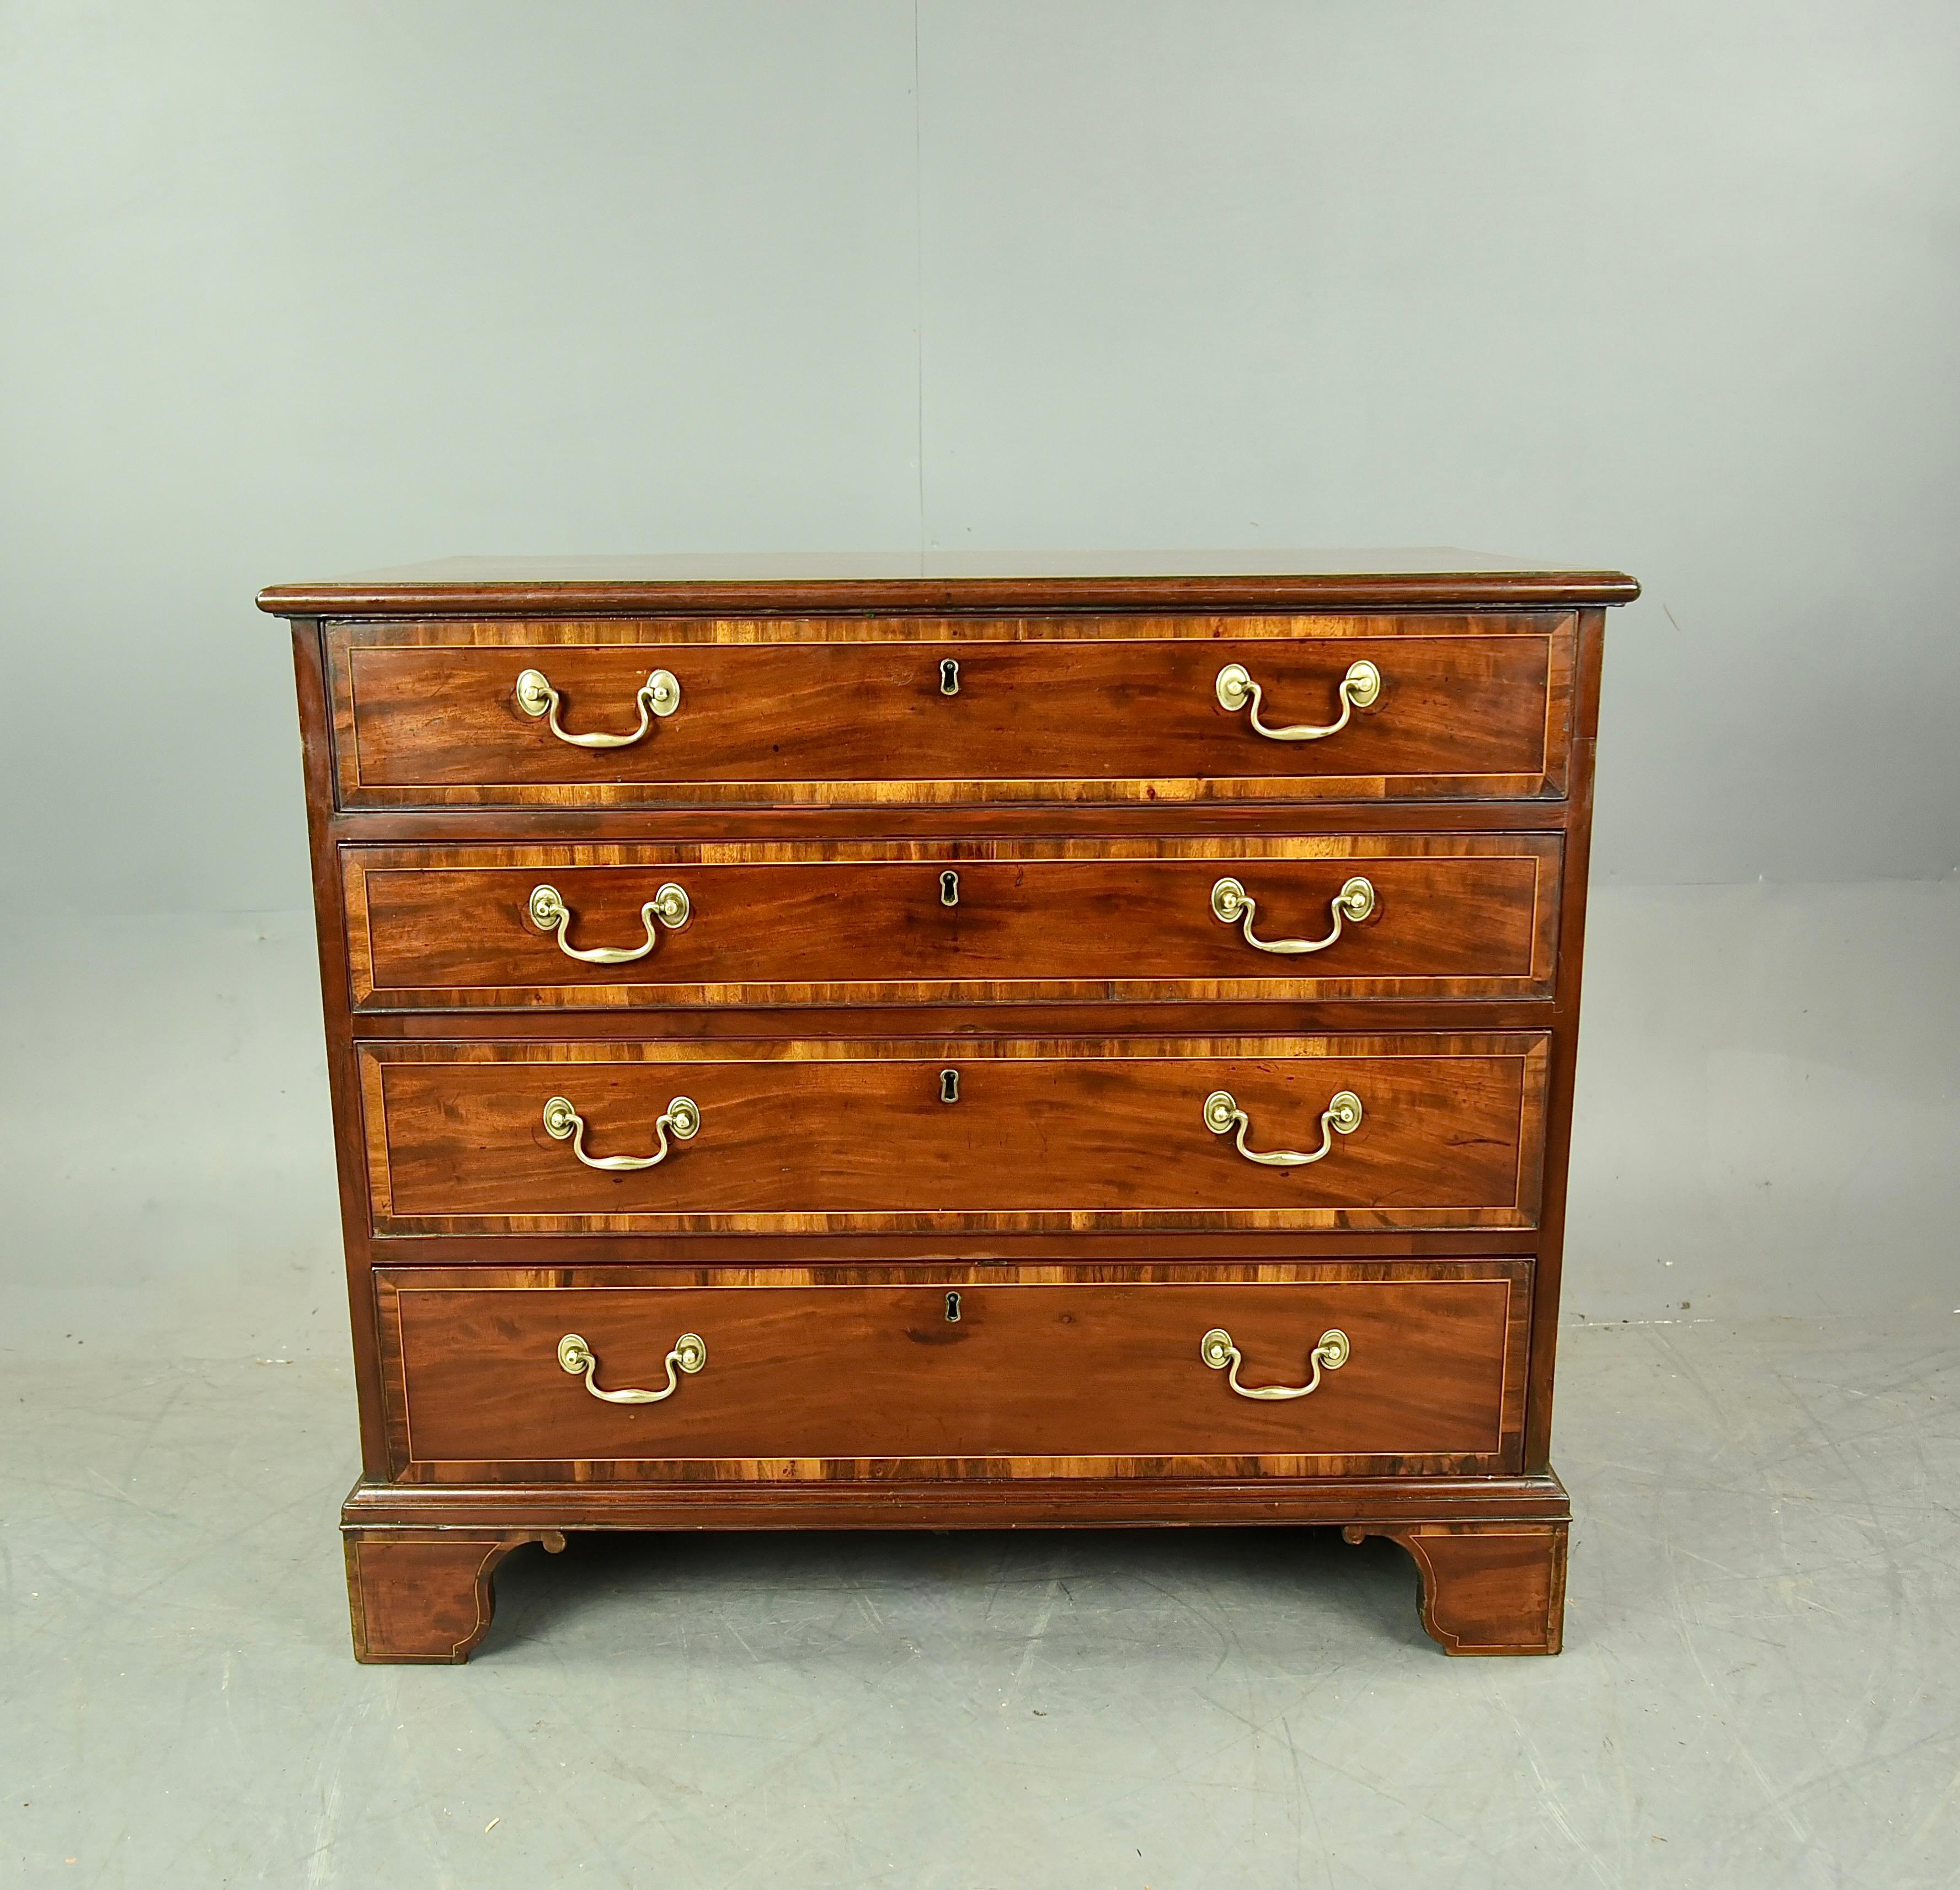 Georgian Mahogany Antique Gentleman’s Chest
Dating from Around 1800 In the Georgian Era, This Delightful Mahogany Antique Campaign Gentleman’s Chest Is Full of Beautiful Charm and Character. With a rectangular moulded top above four graduating cock